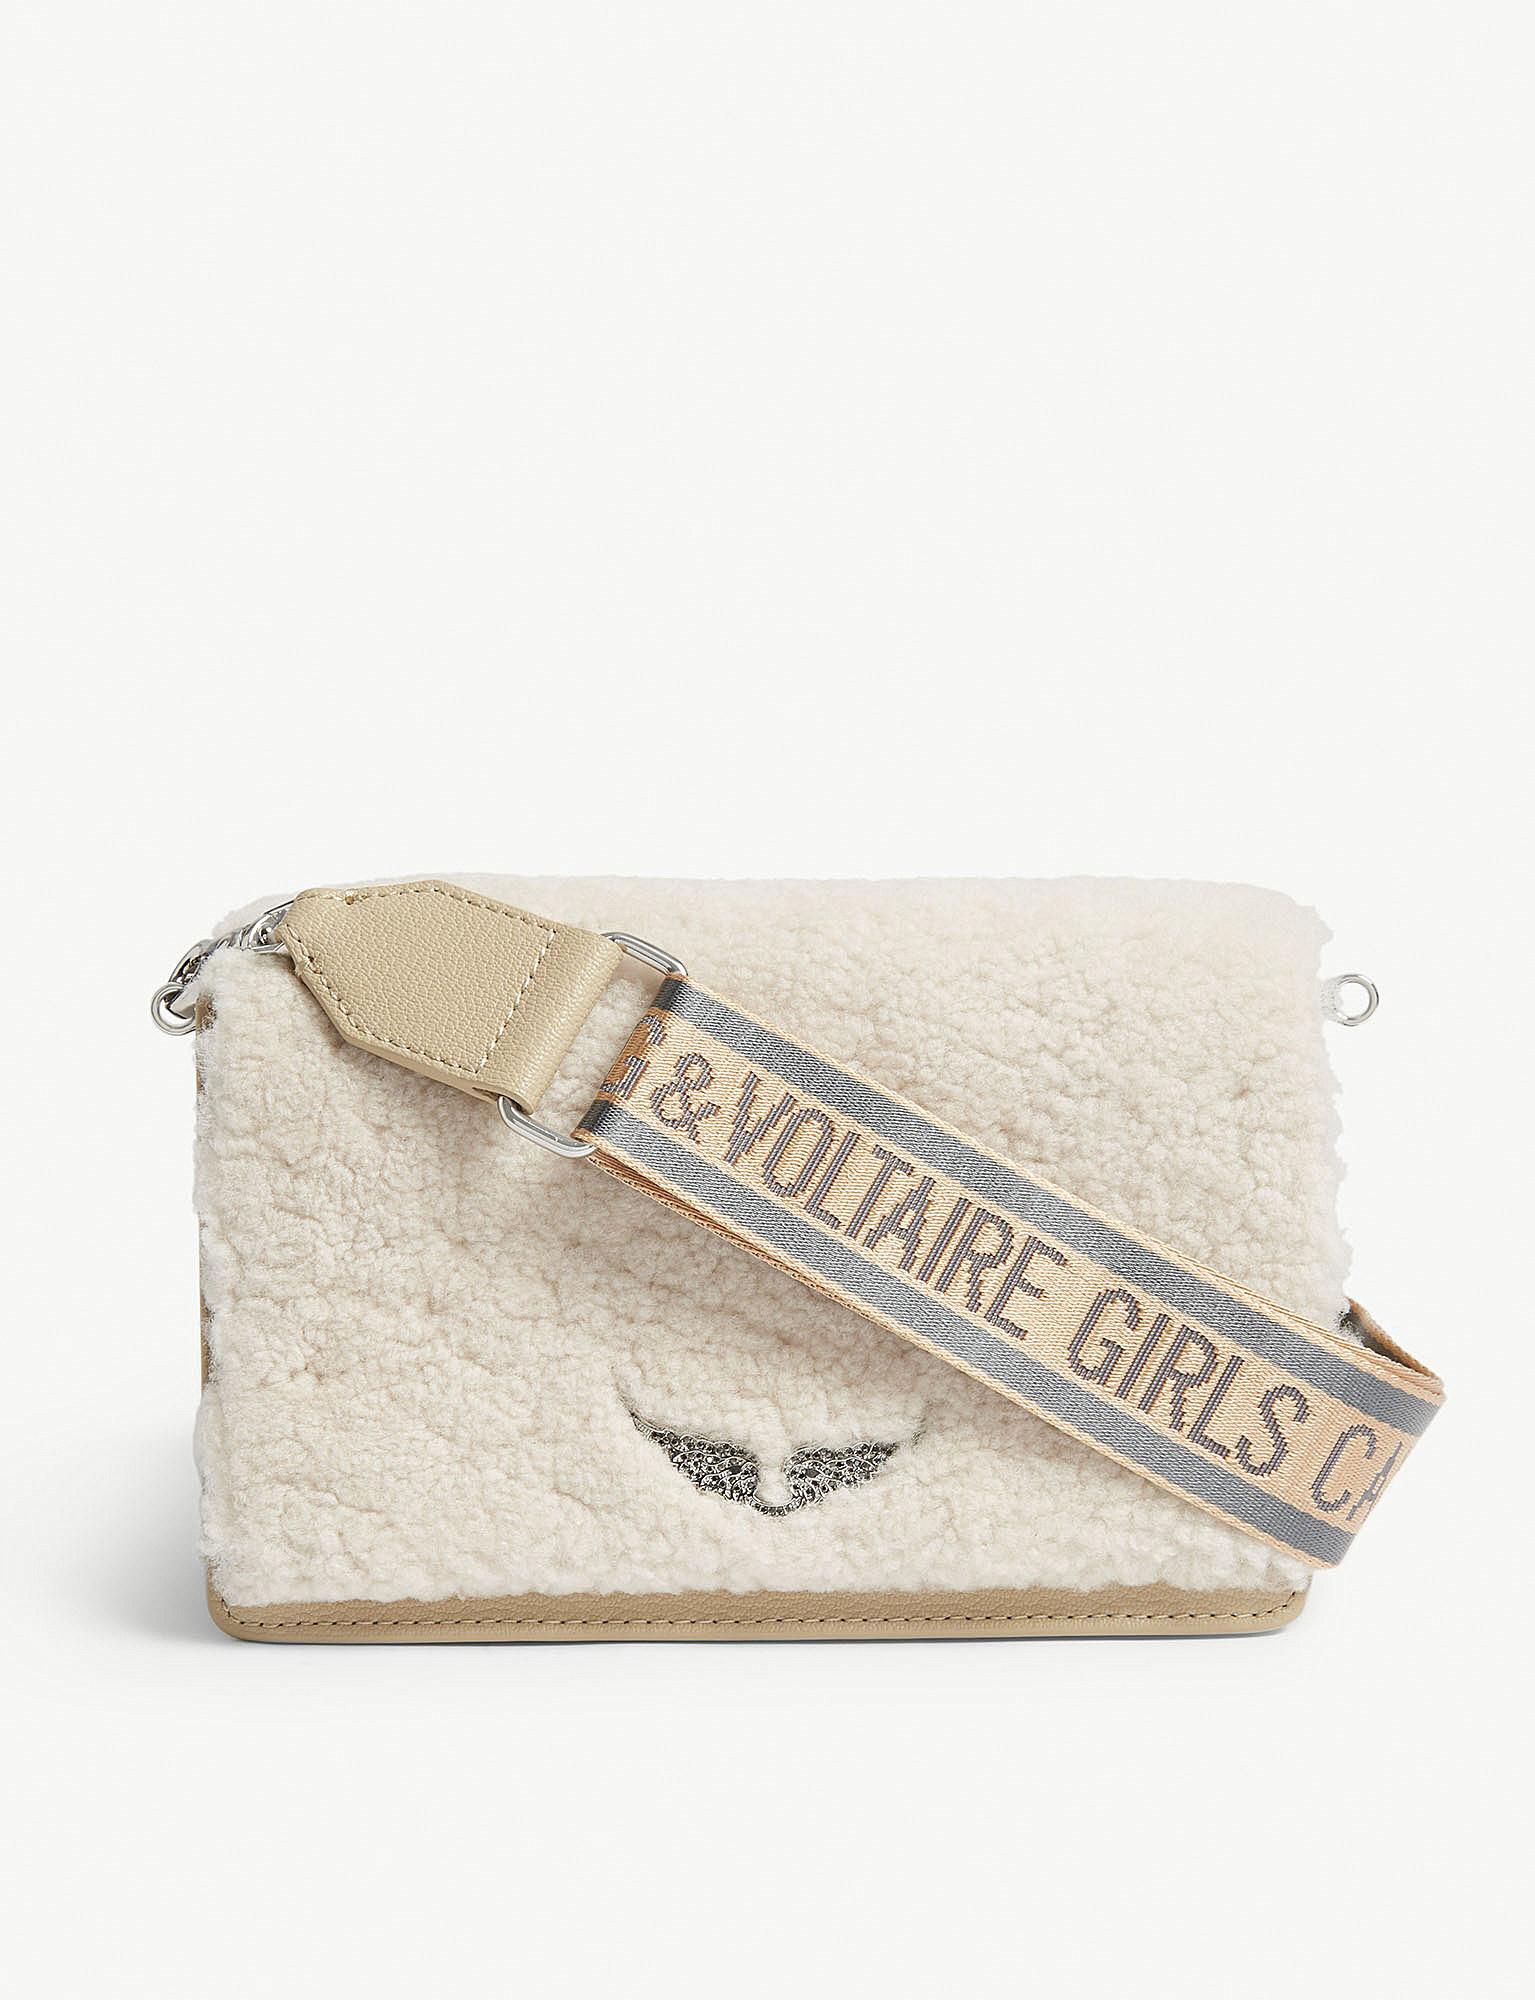 Zadig & Voltaire Lolita Shearling Leather Cross-body Bag in Natural | Lyst